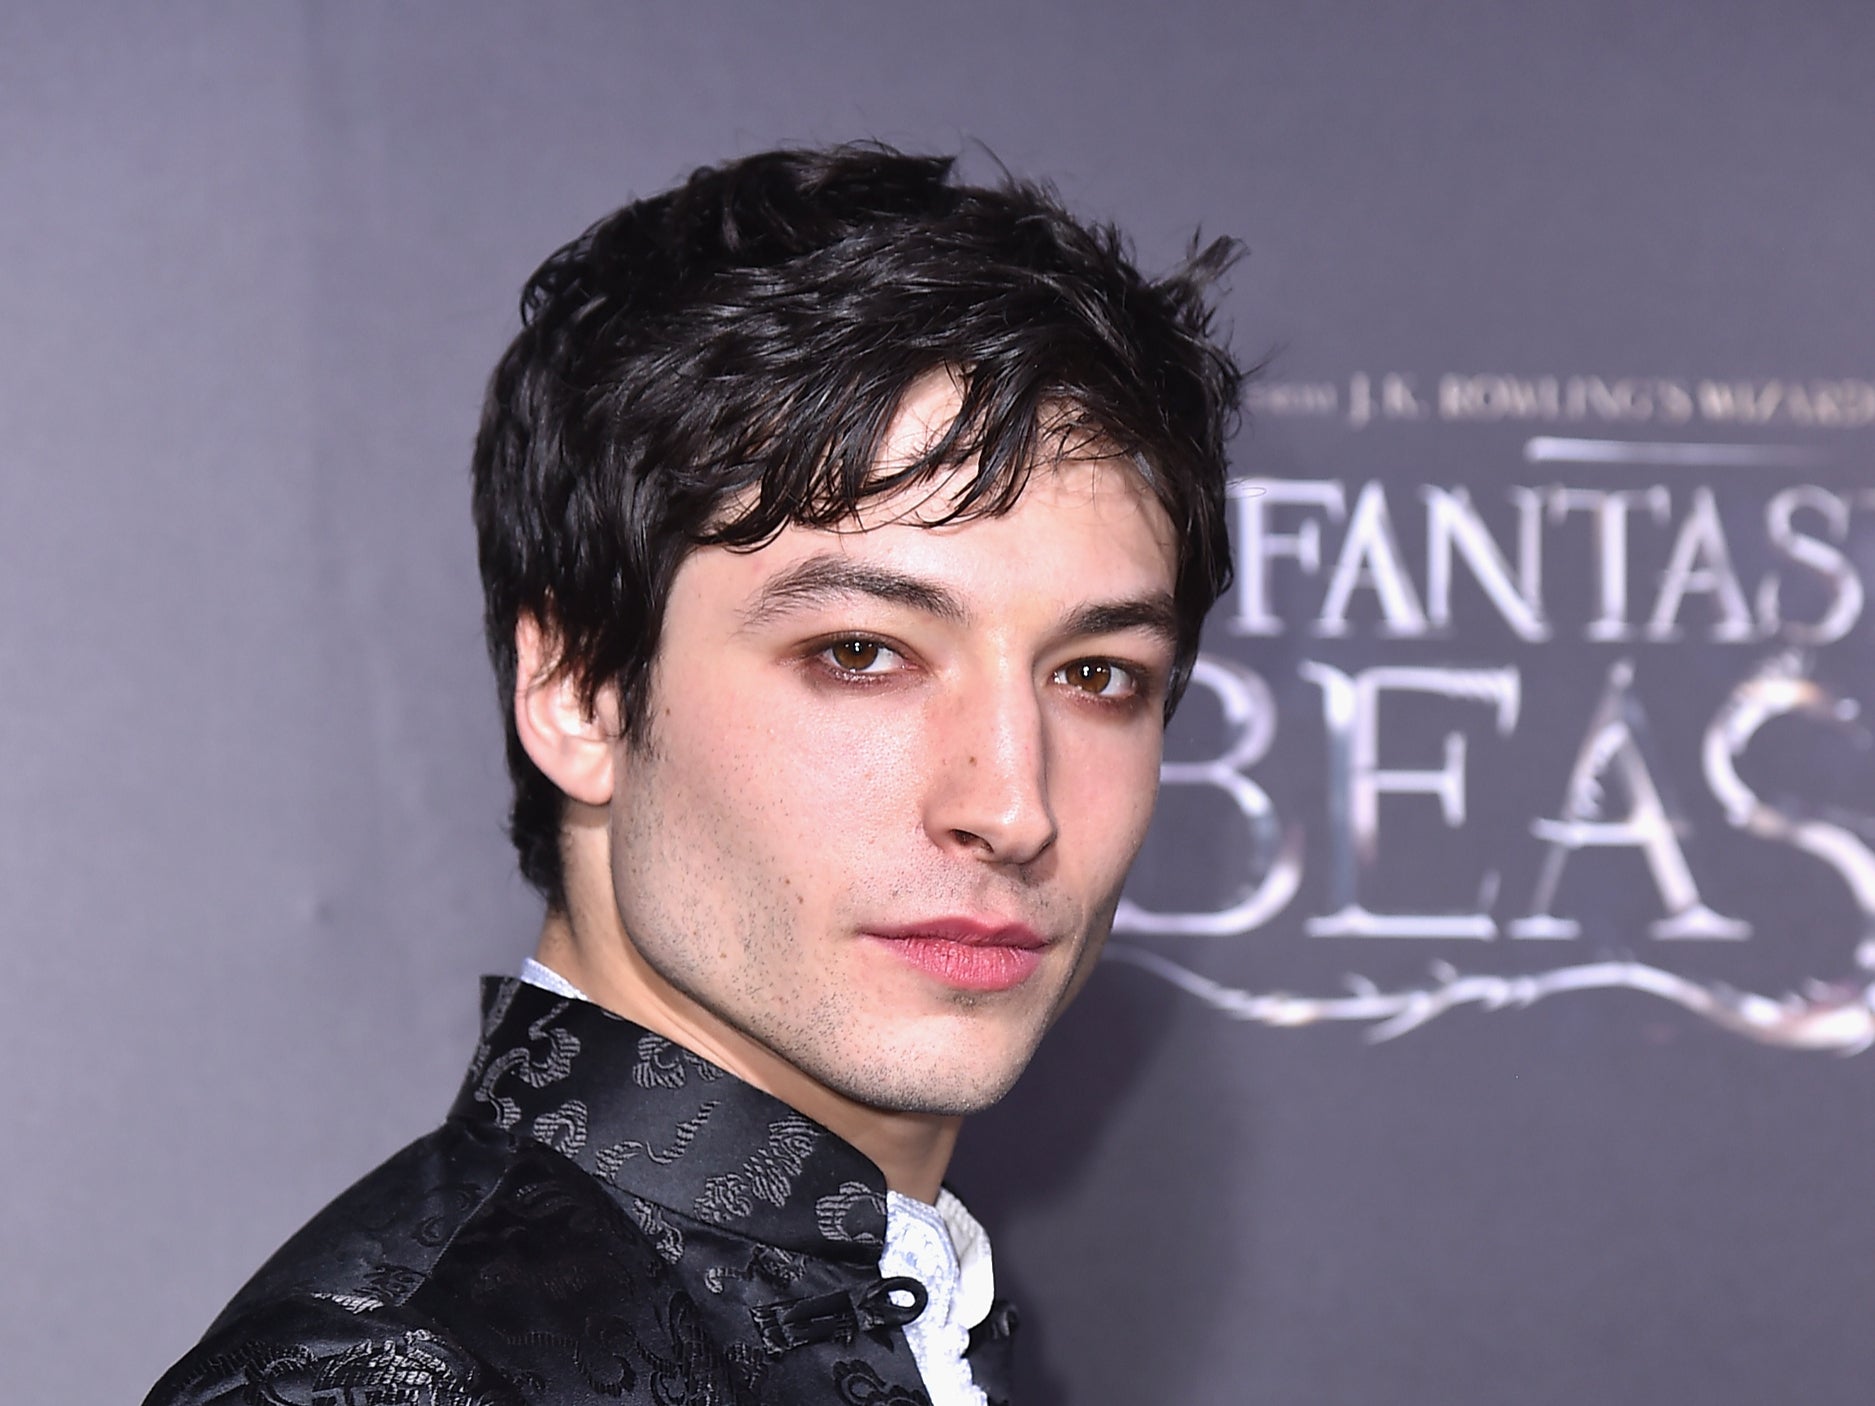 Ezra Miller attends the Fantastic Beasts And Where To Find Them premier in New York in 2016